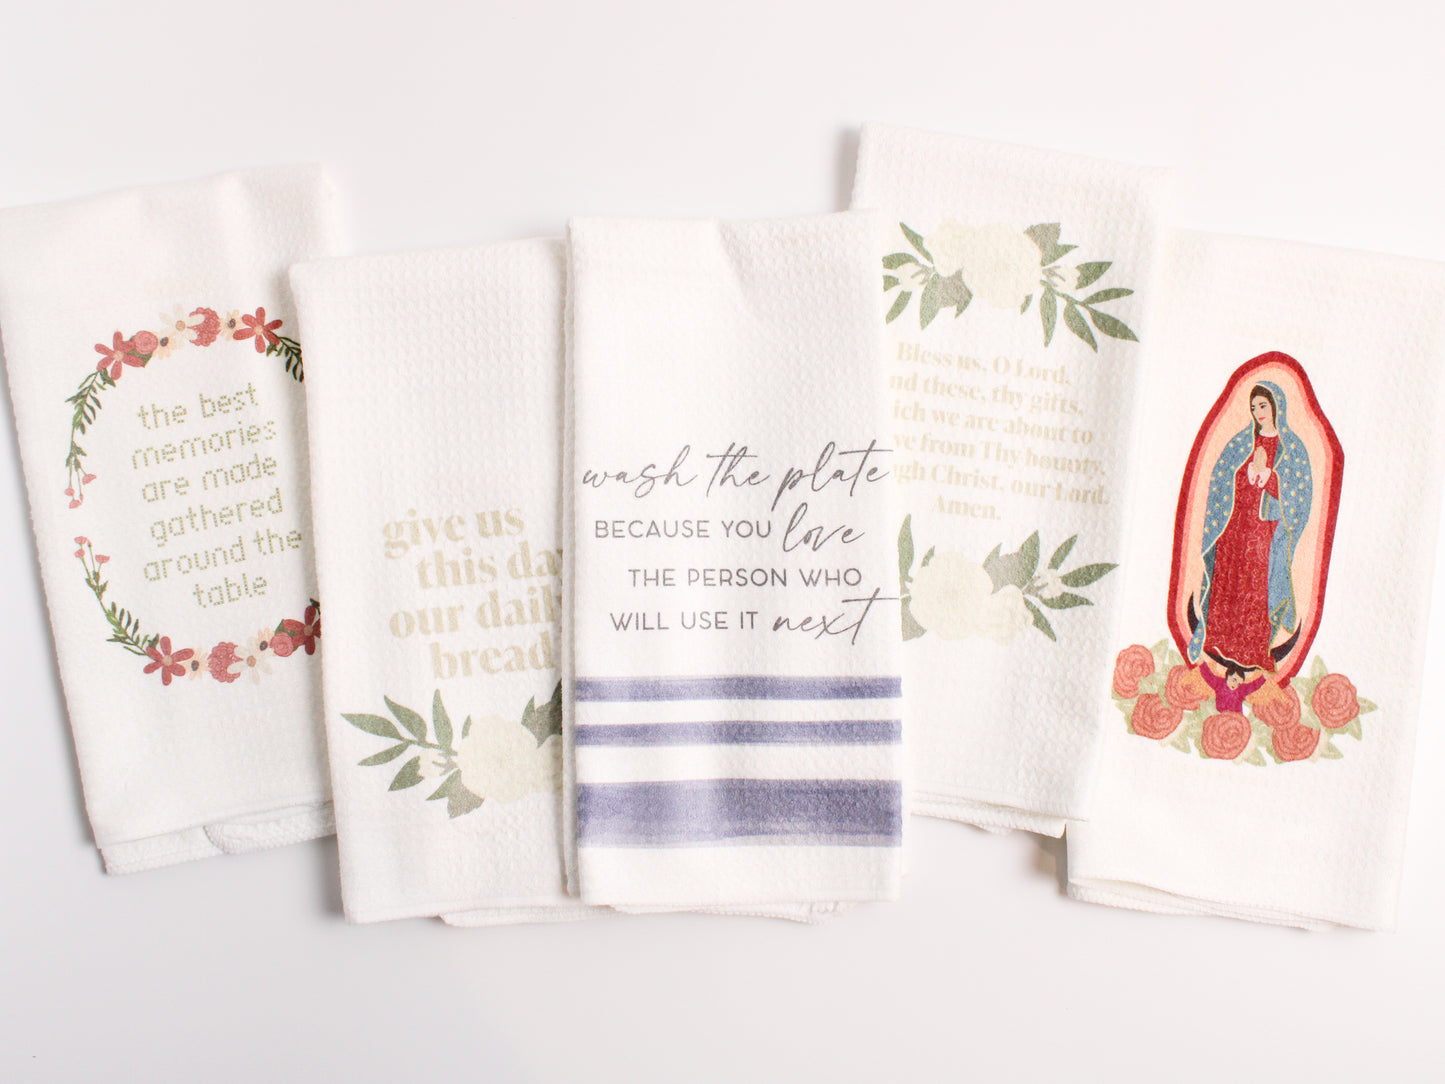 Give Us This Day Our Daily Bread Tea Towel